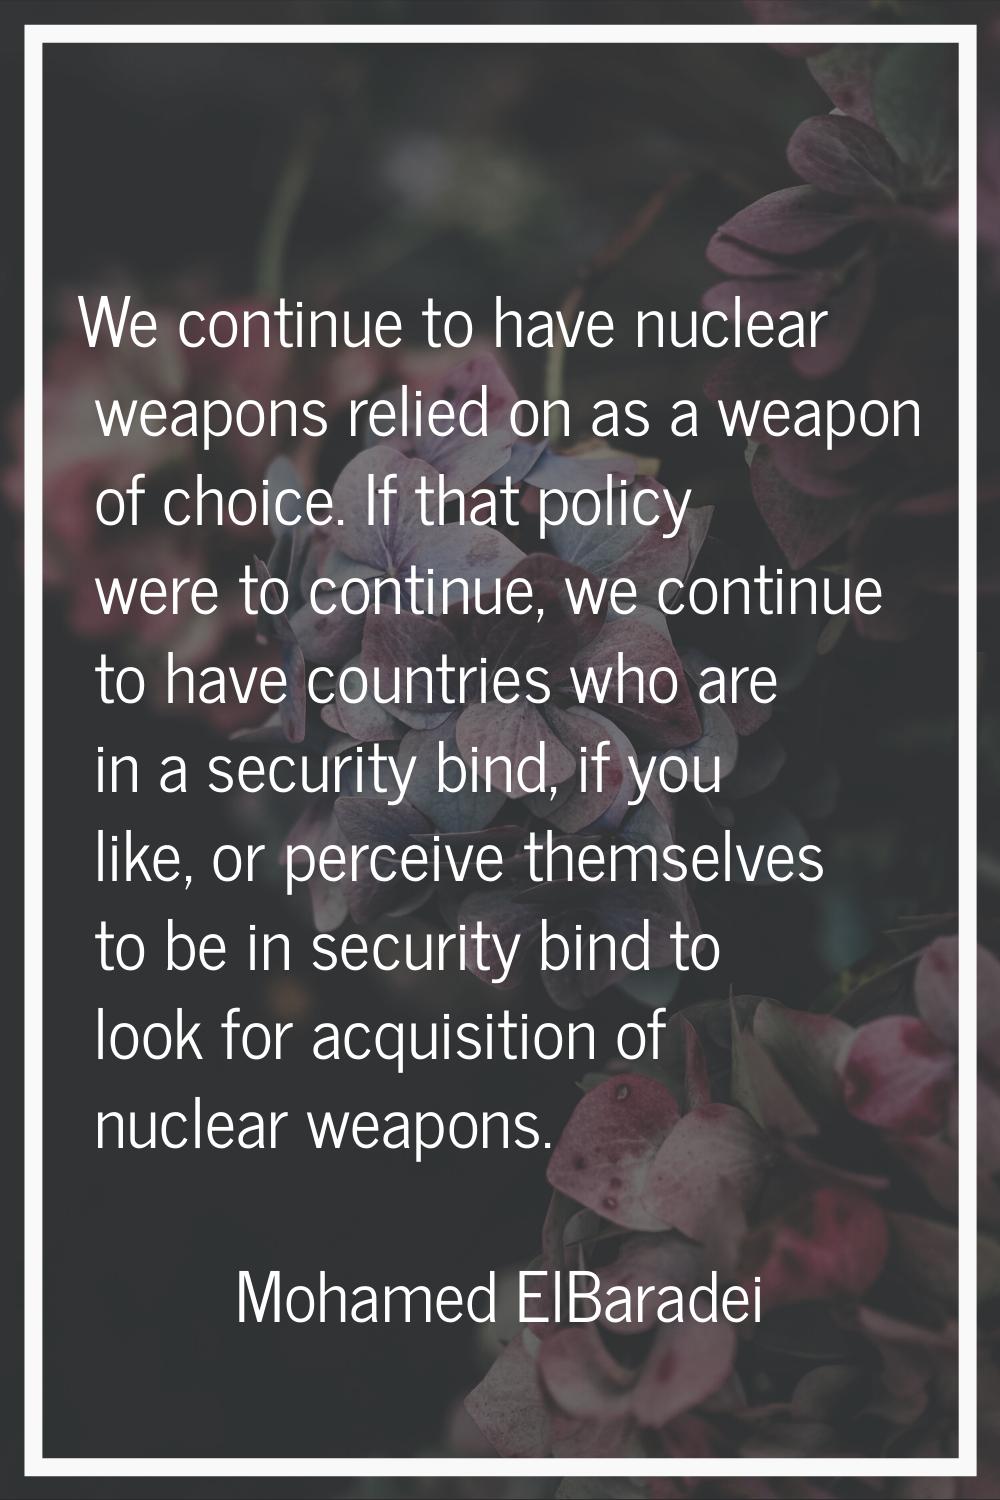 We continue to have nuclear weapons relied on as a weapon of choice. If that policy were to continu